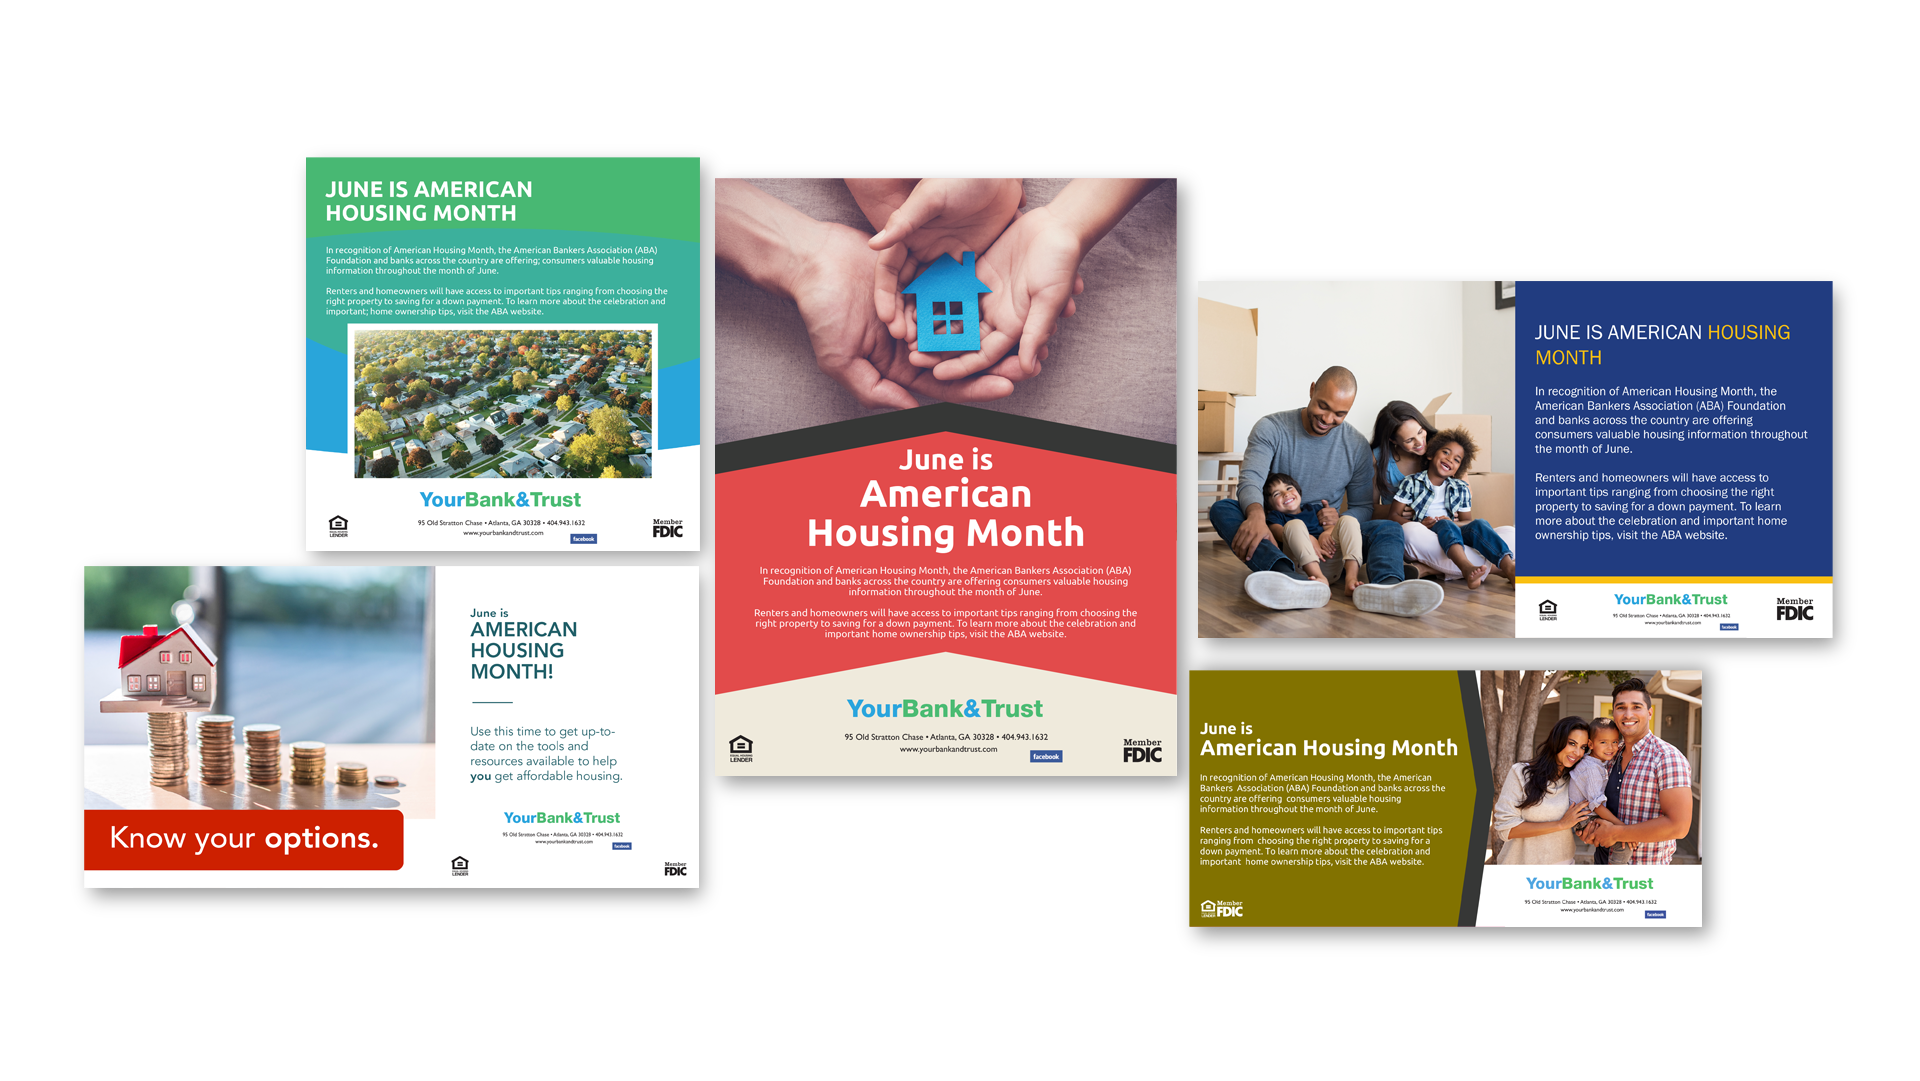 June American Housing Month creative campaigns on BMC